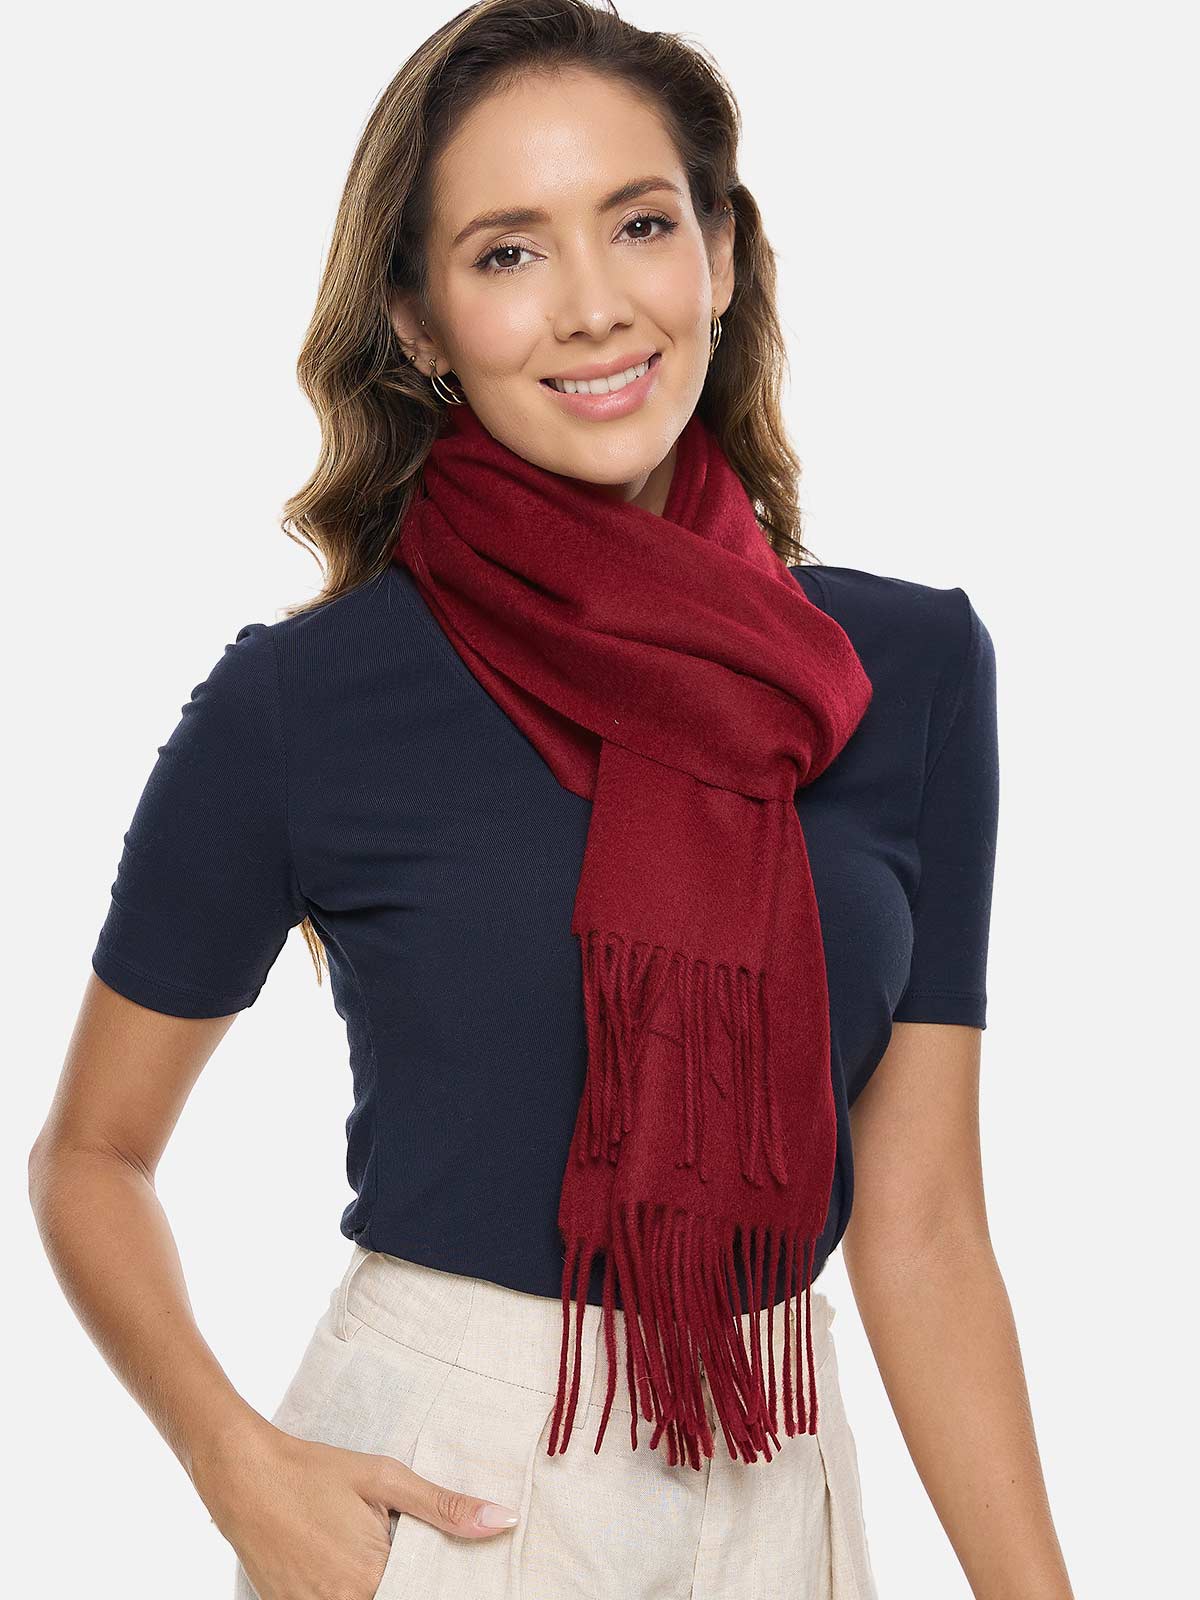 Wine Red Cashmere Scarf